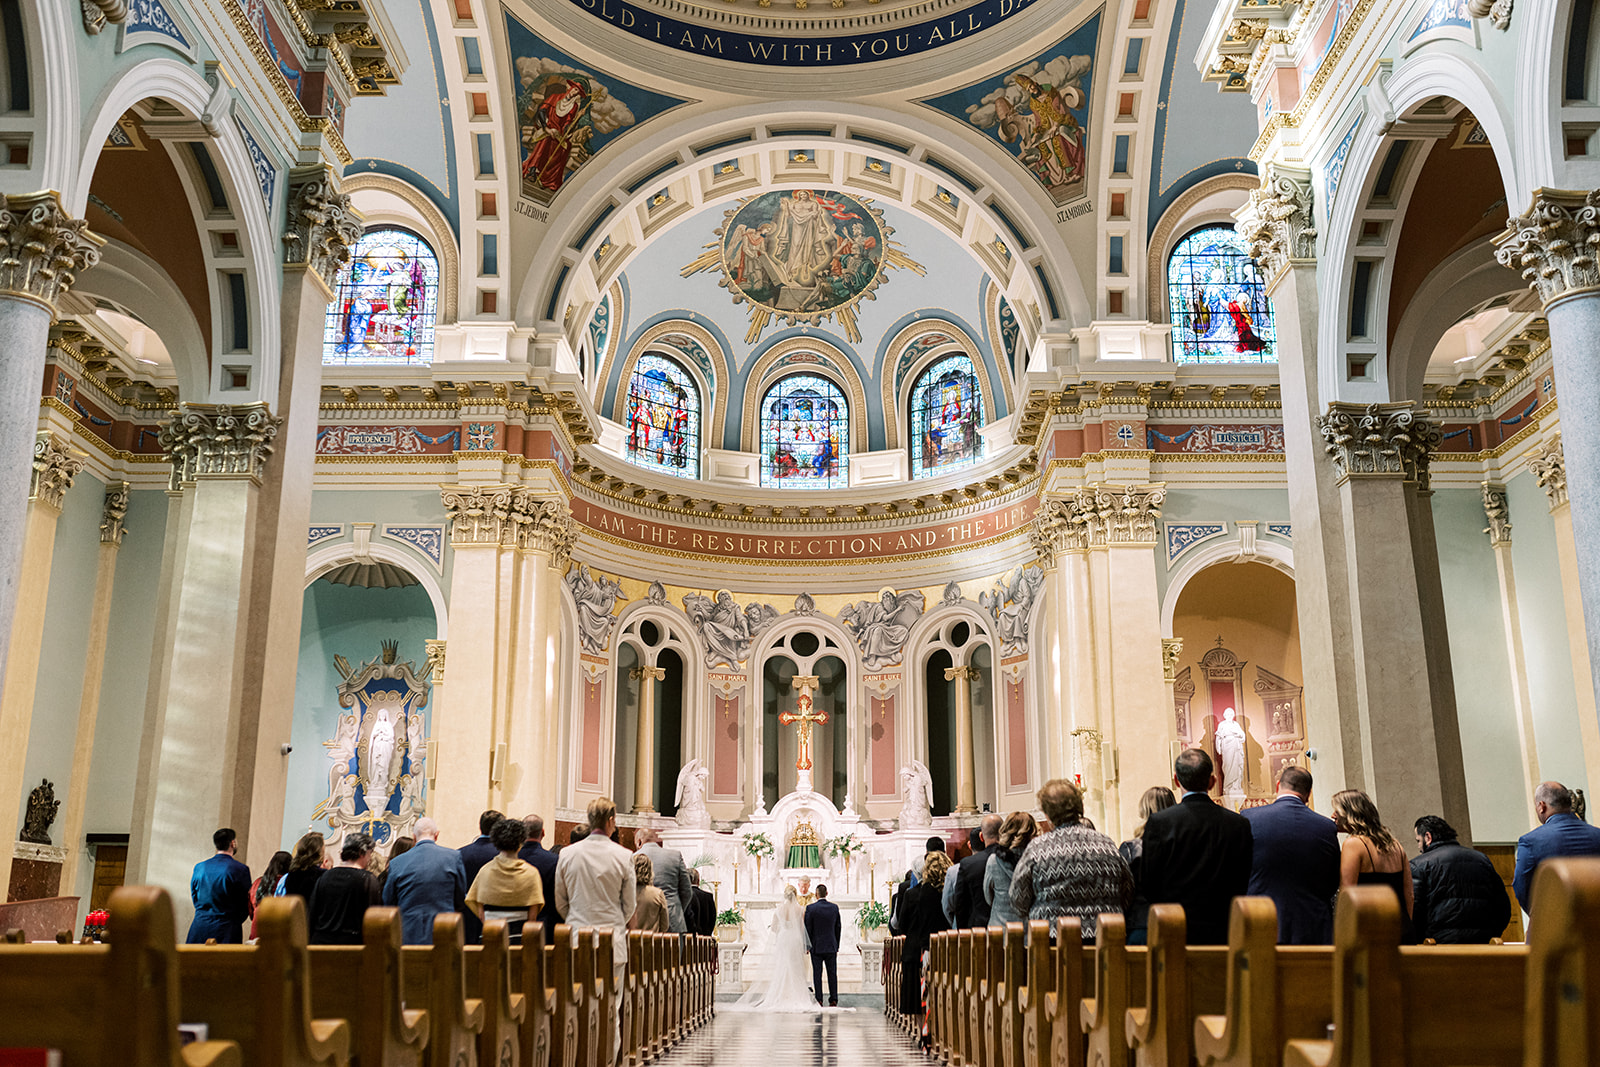 Wedding ceremony photos by Lindsey Ford Photography at St. Patrick's in downtown Harrisburg, PA